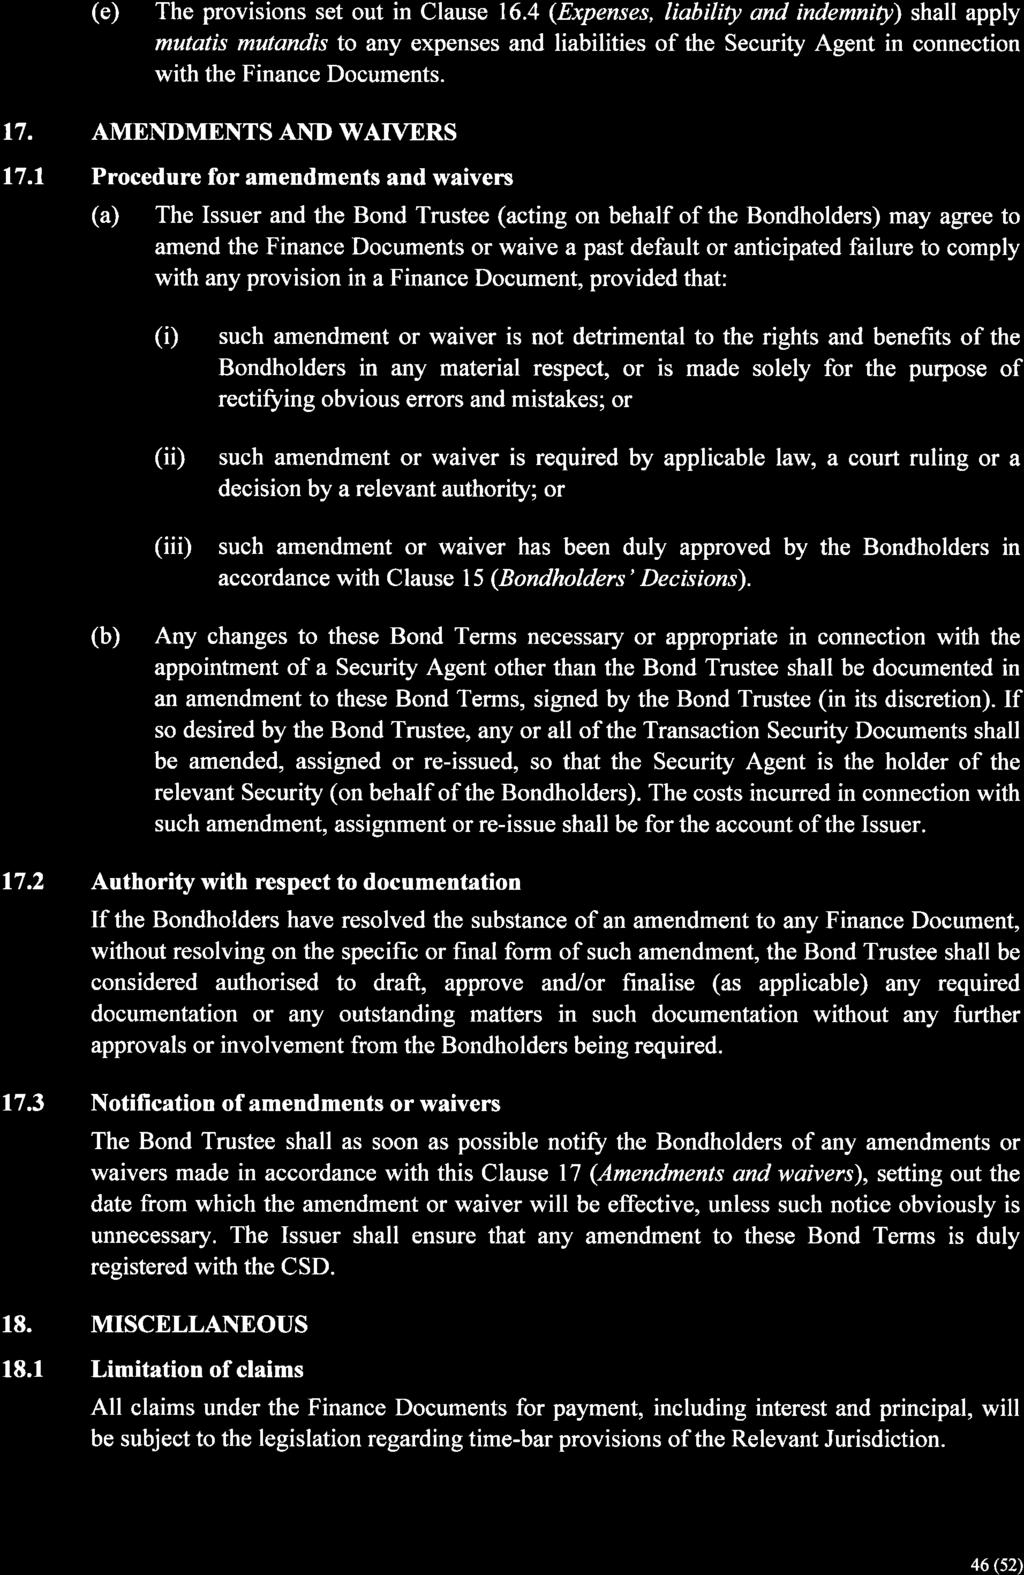 (e) The provisions set out in Clause 16.